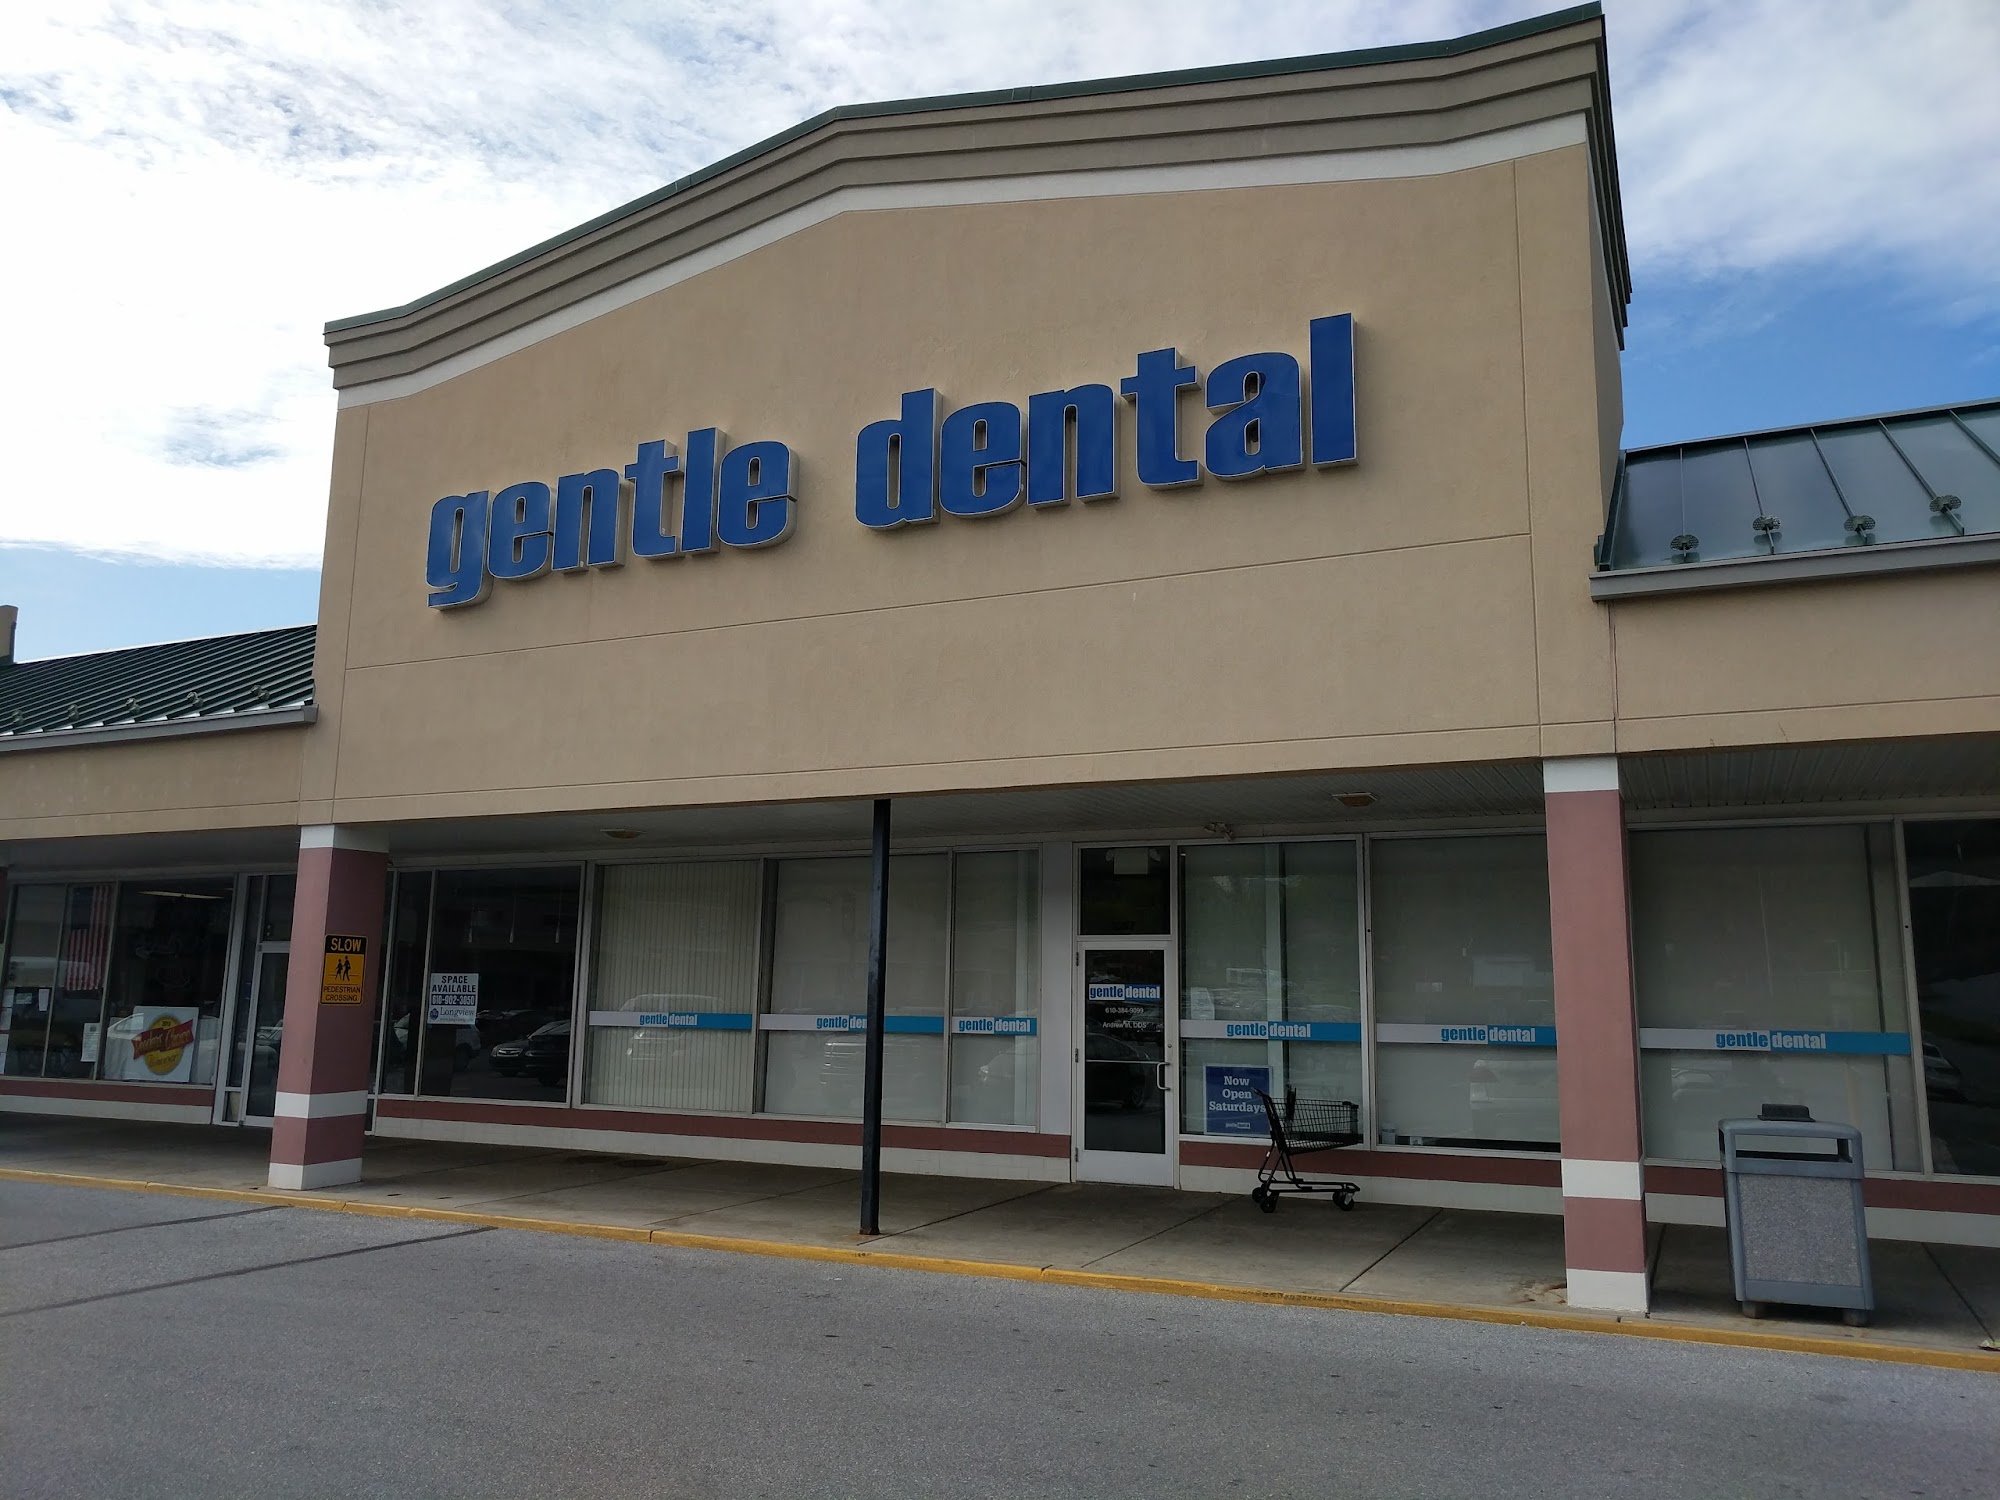 Gentle Dental of Thorndale 3307 Lincoln Hwy, Thorndale Pennsylvania 19372